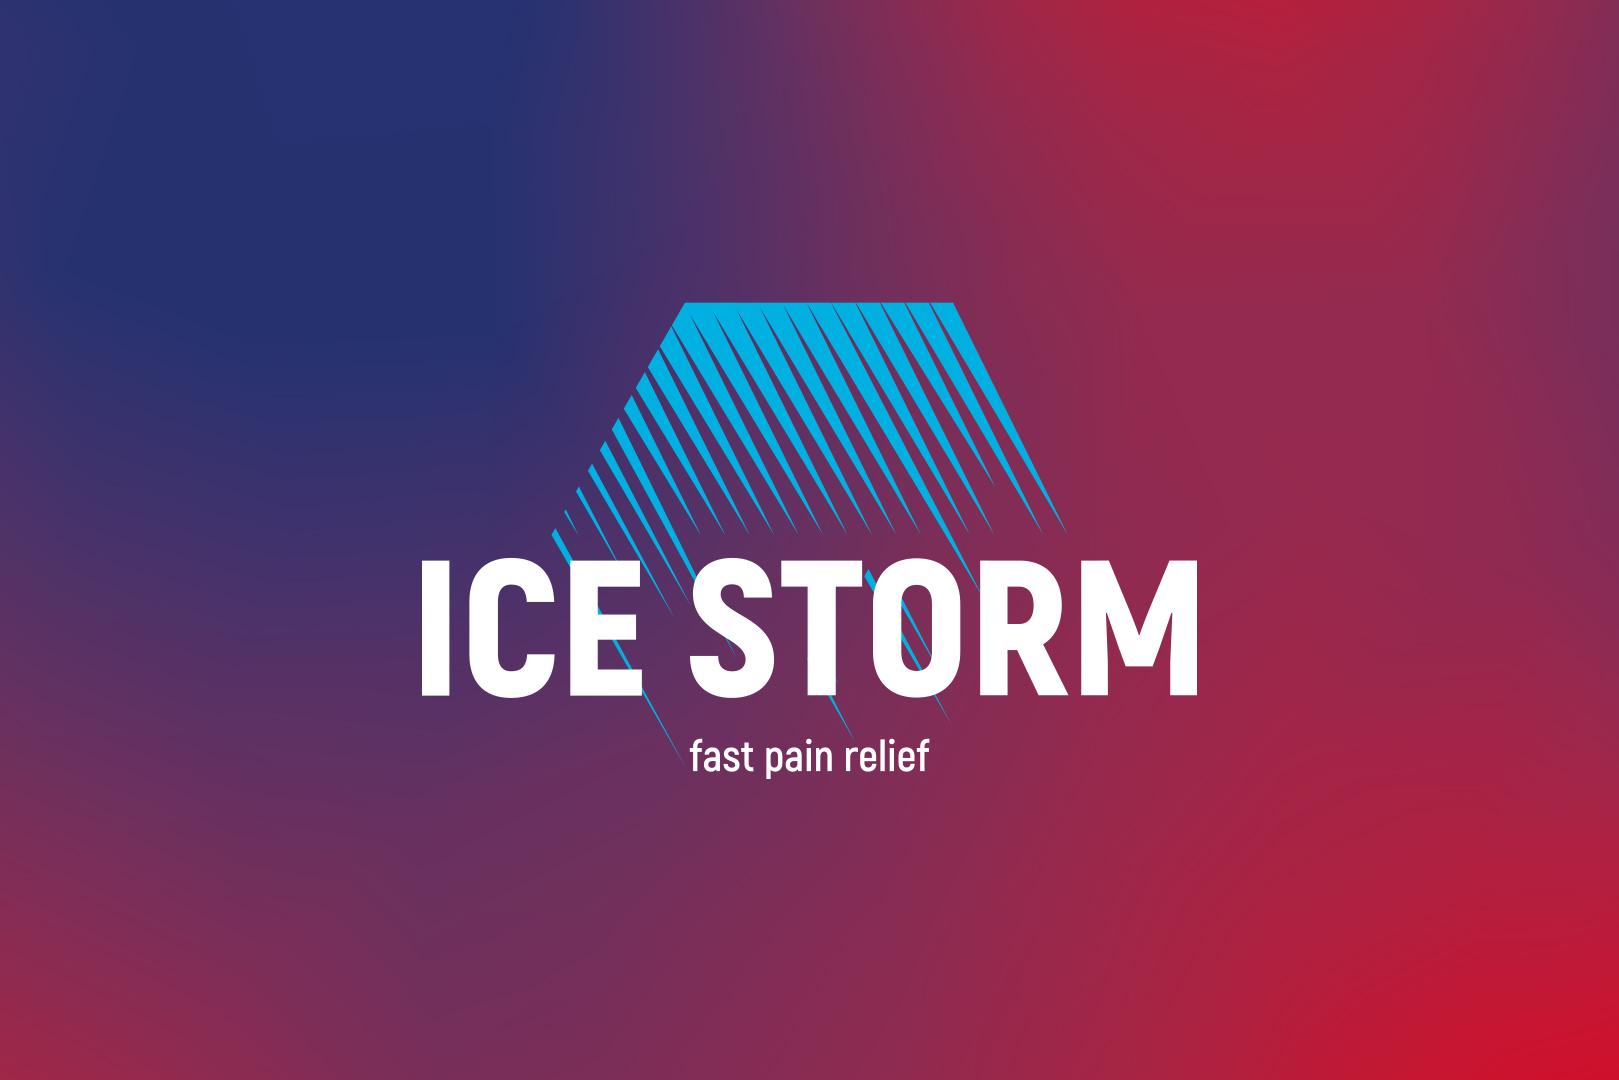 Introducing Ice Storm Hot & Cold Packs